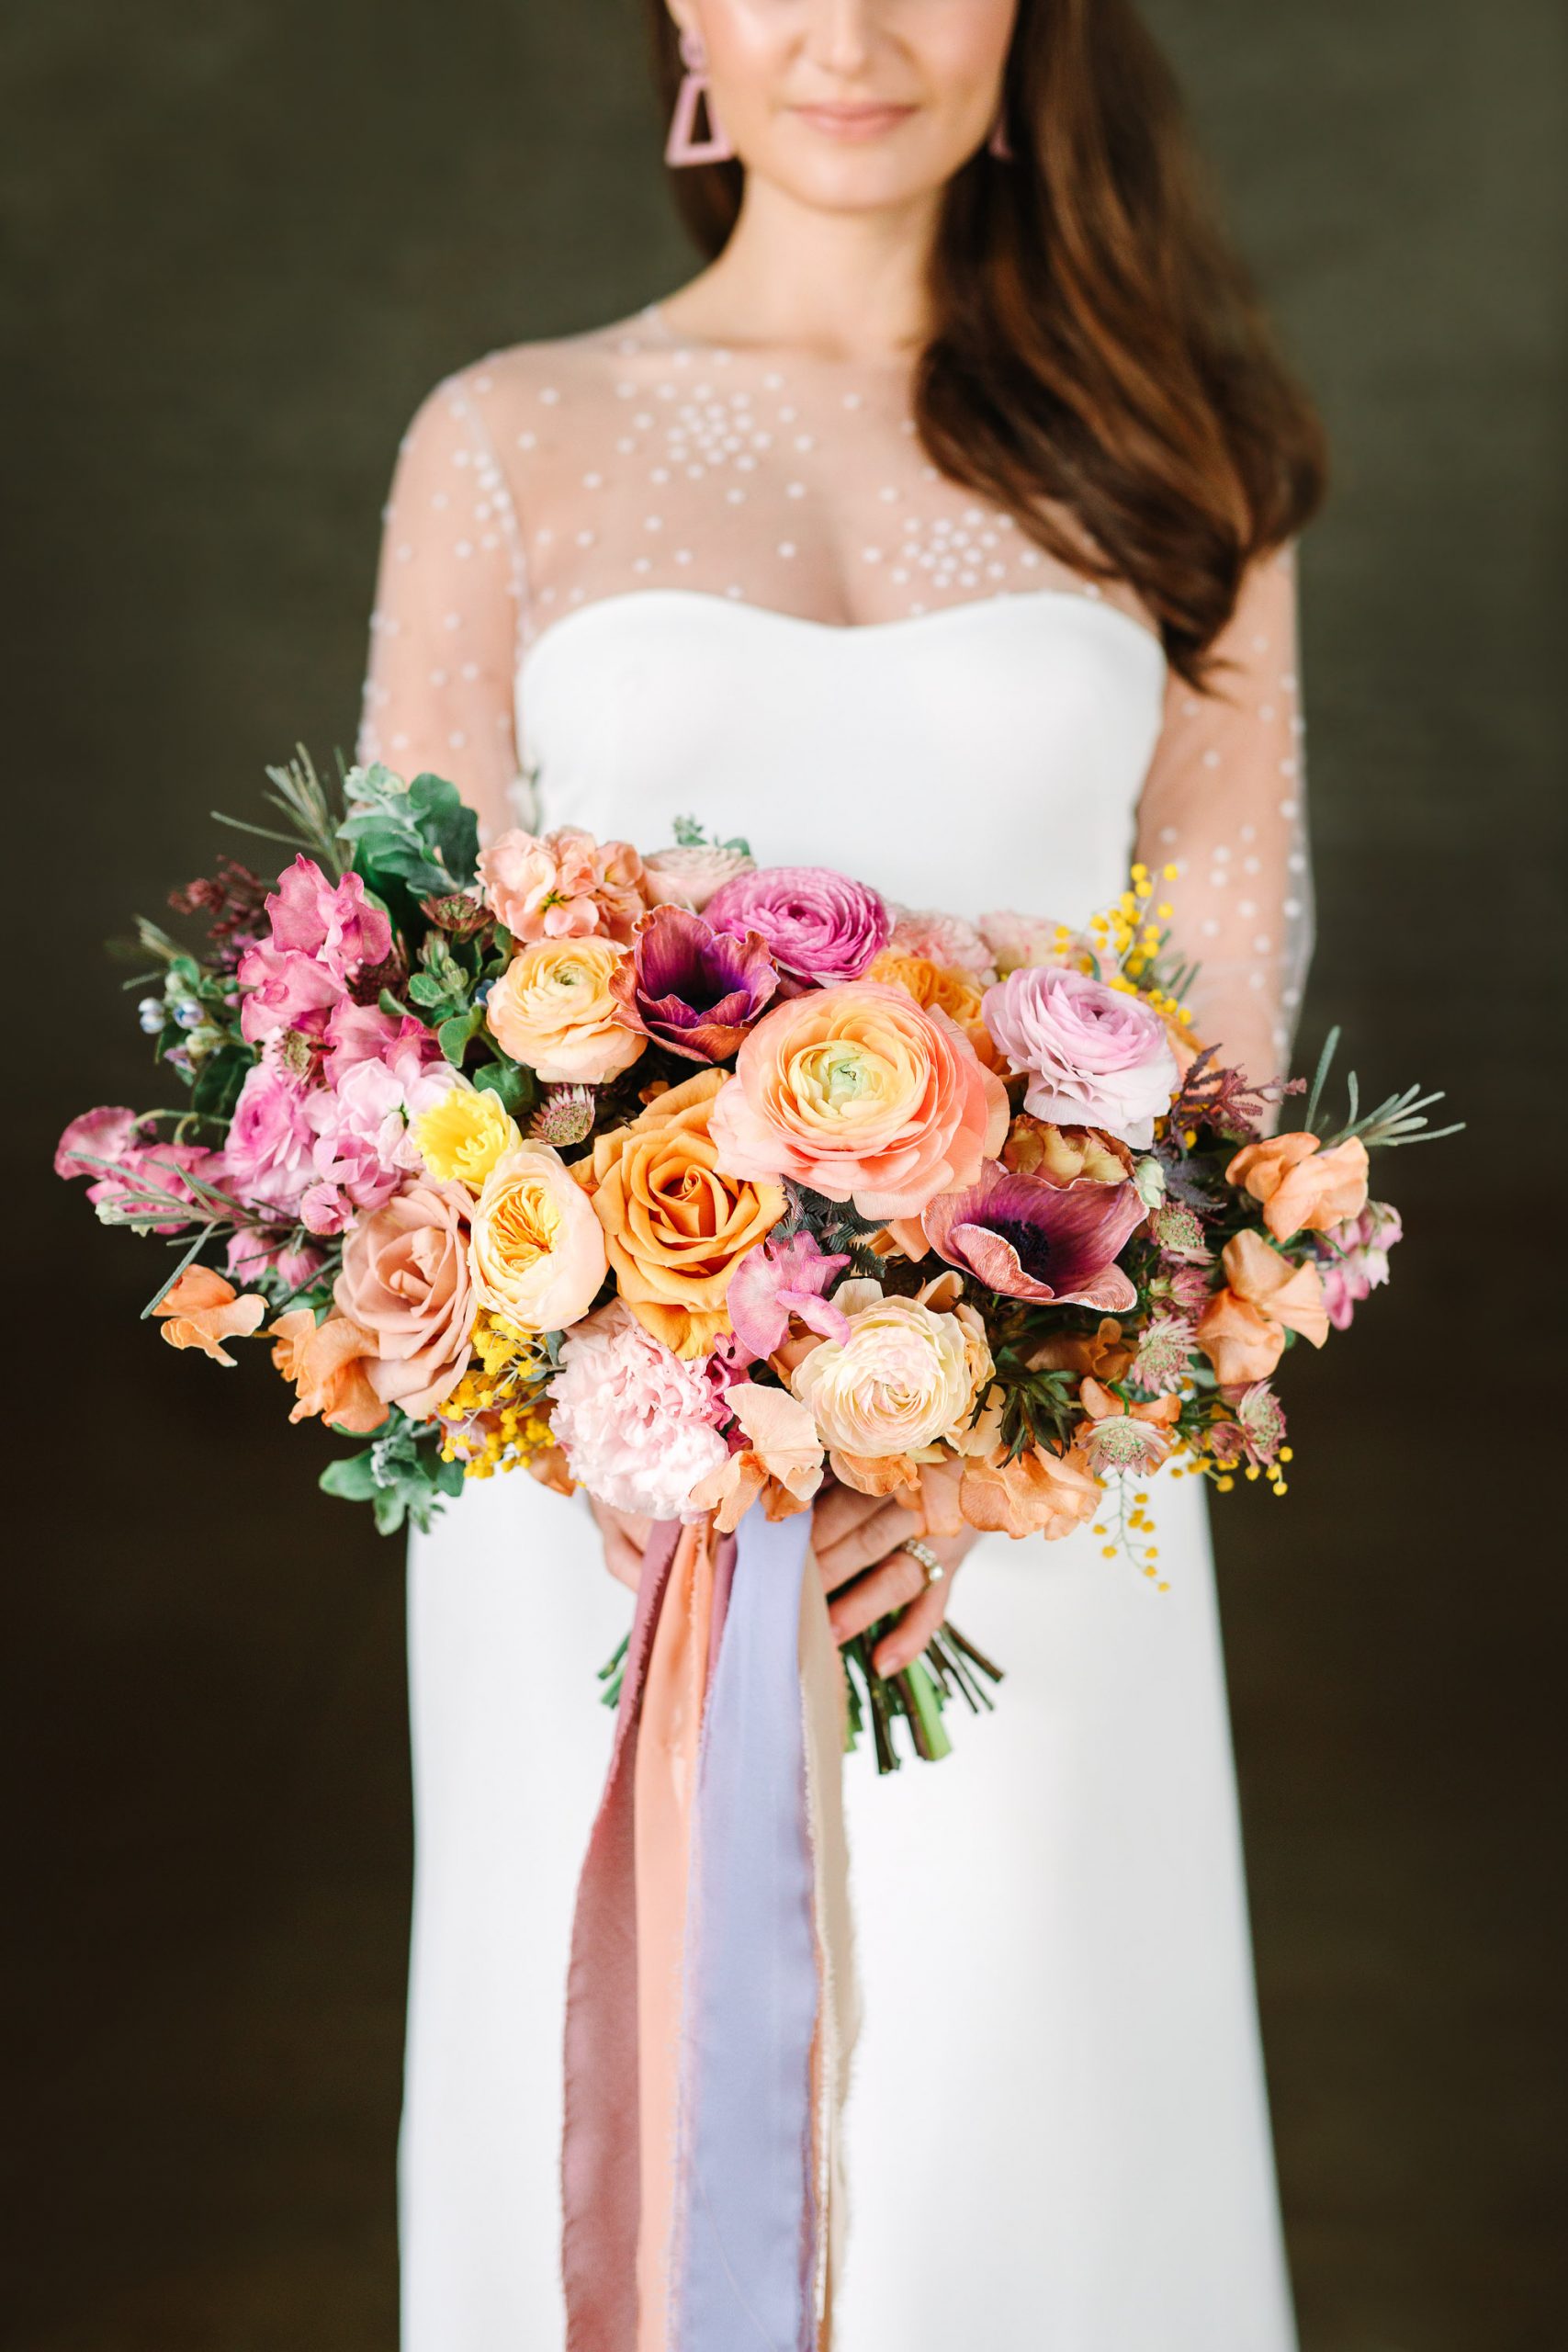 Bride with colorful bouquet by Mary Costa Photography